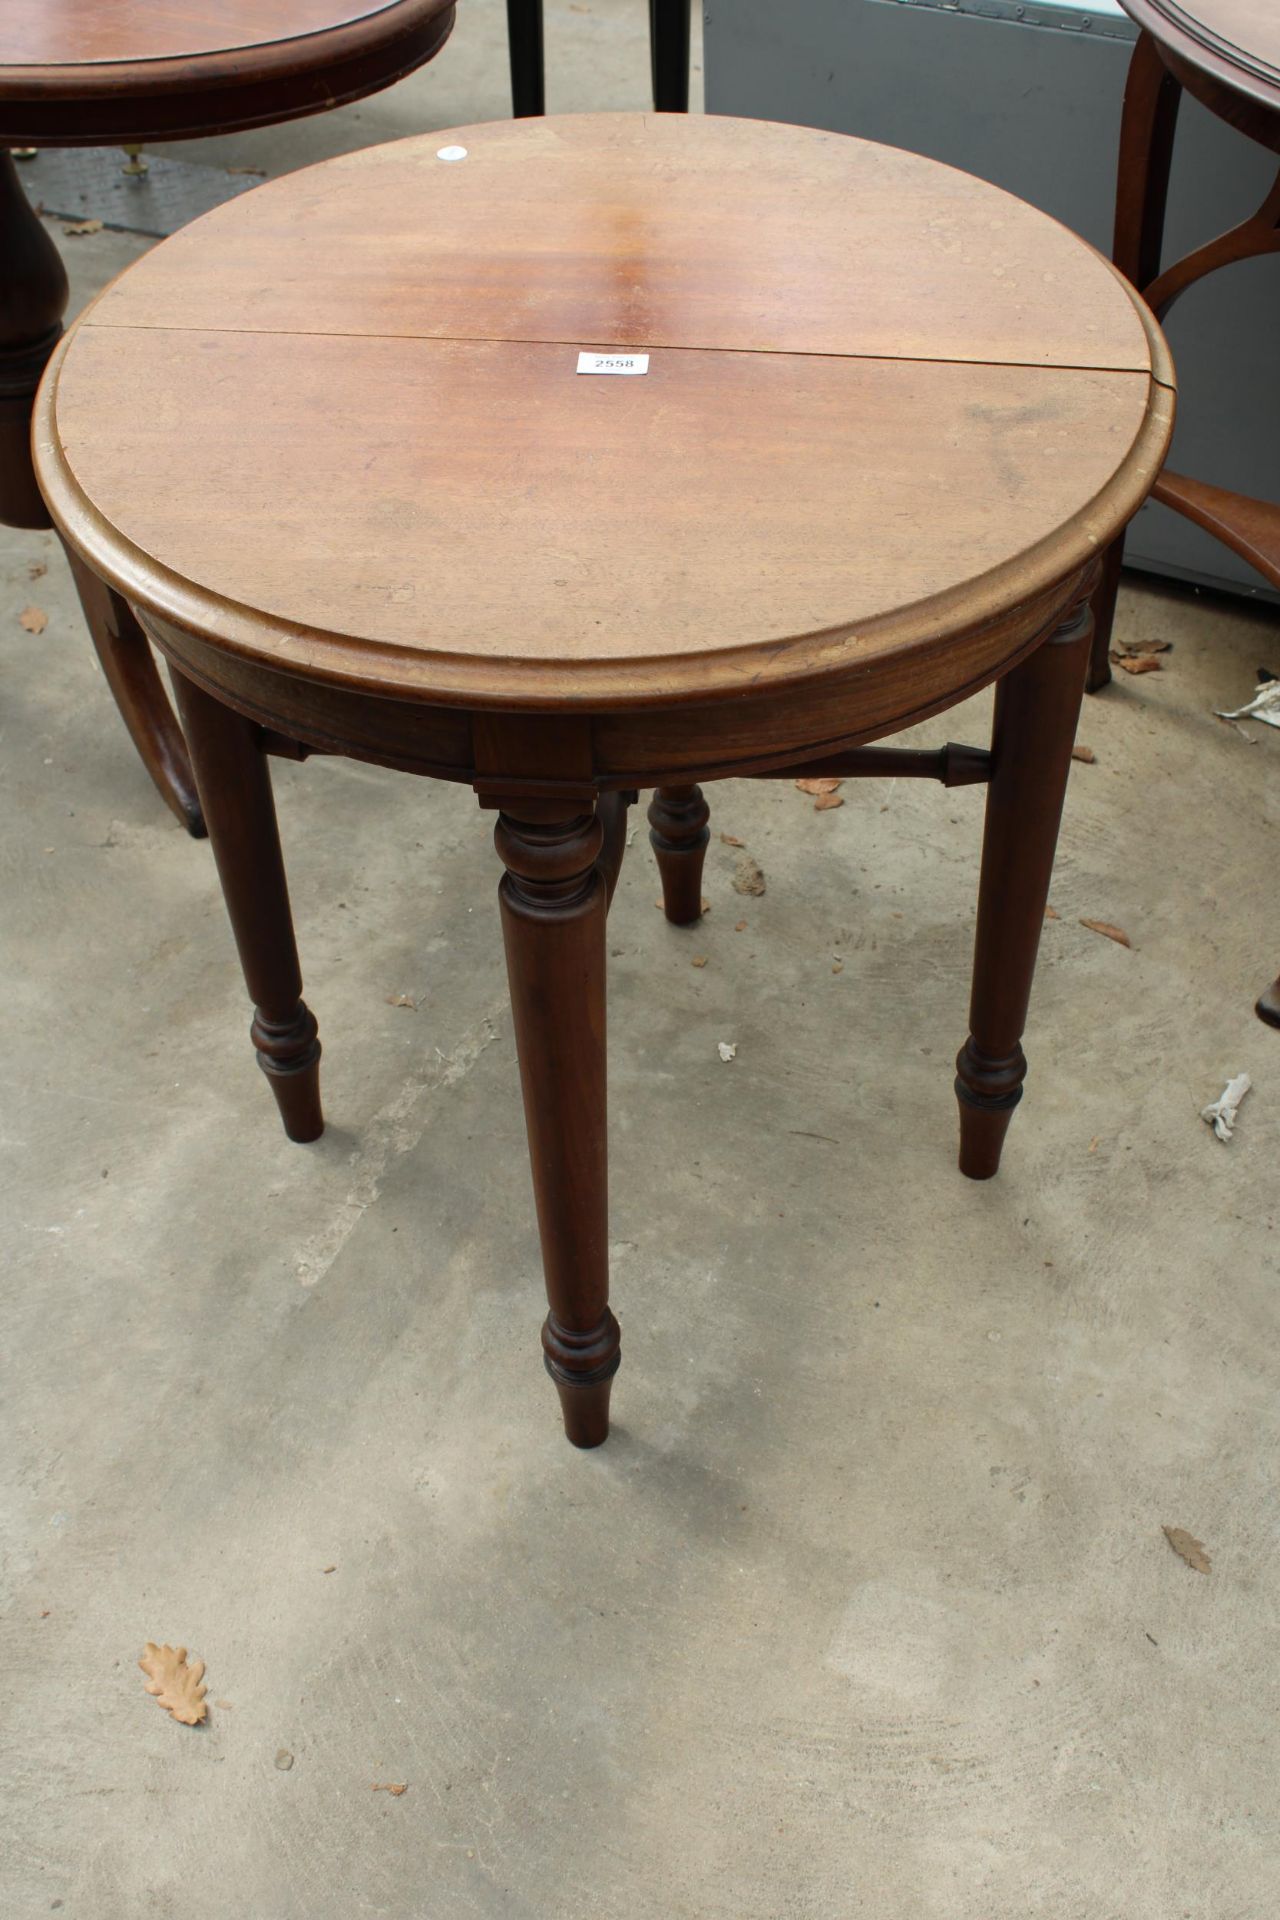 A VICTORIAN MAHOGANY 25" DIAMETER CENTRE TABLE ON TURNED LEGS AND STRETCHERS